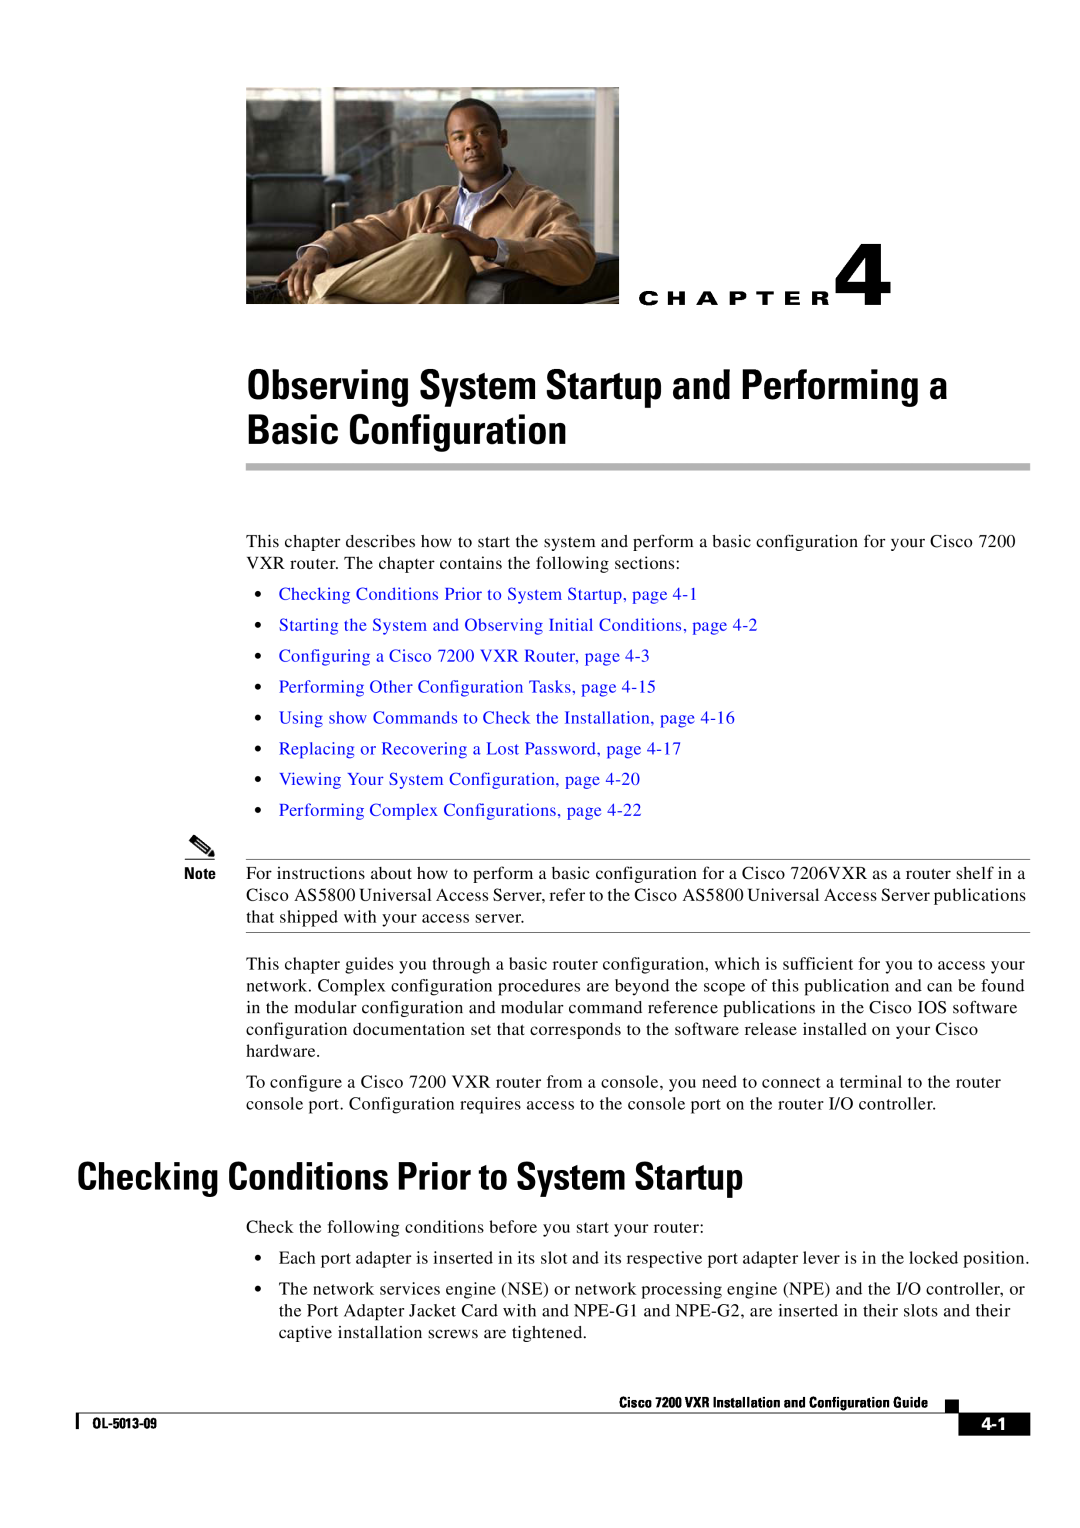 Cisco Systems 7200 VXR manual Basic Configuration, Checking Conditions Prior to System Startup, C H A P T E R 